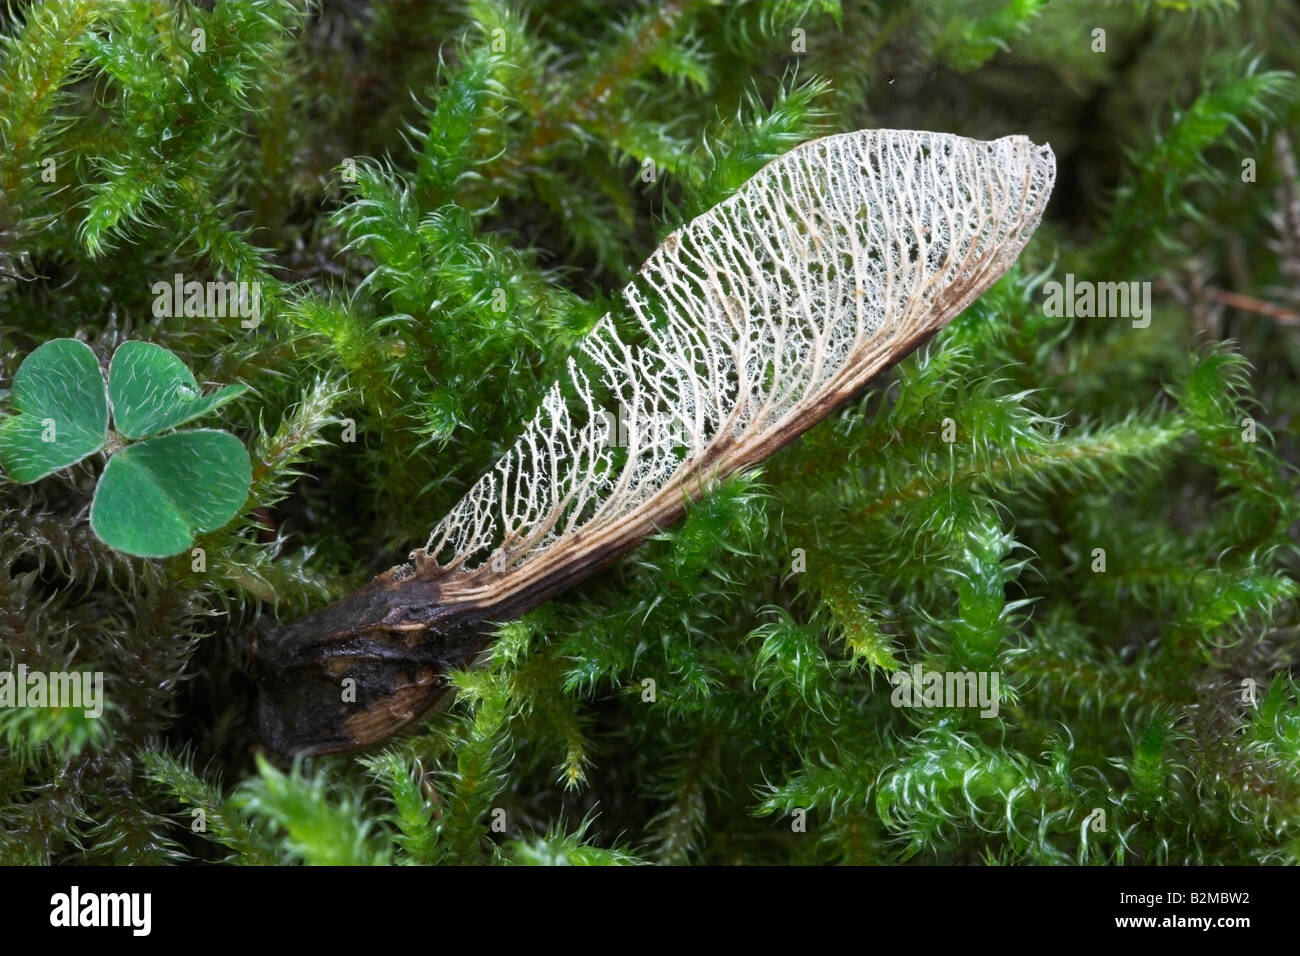 Skeletonised sycamore seed Acer pseudoplatanus on moss Stock Photo